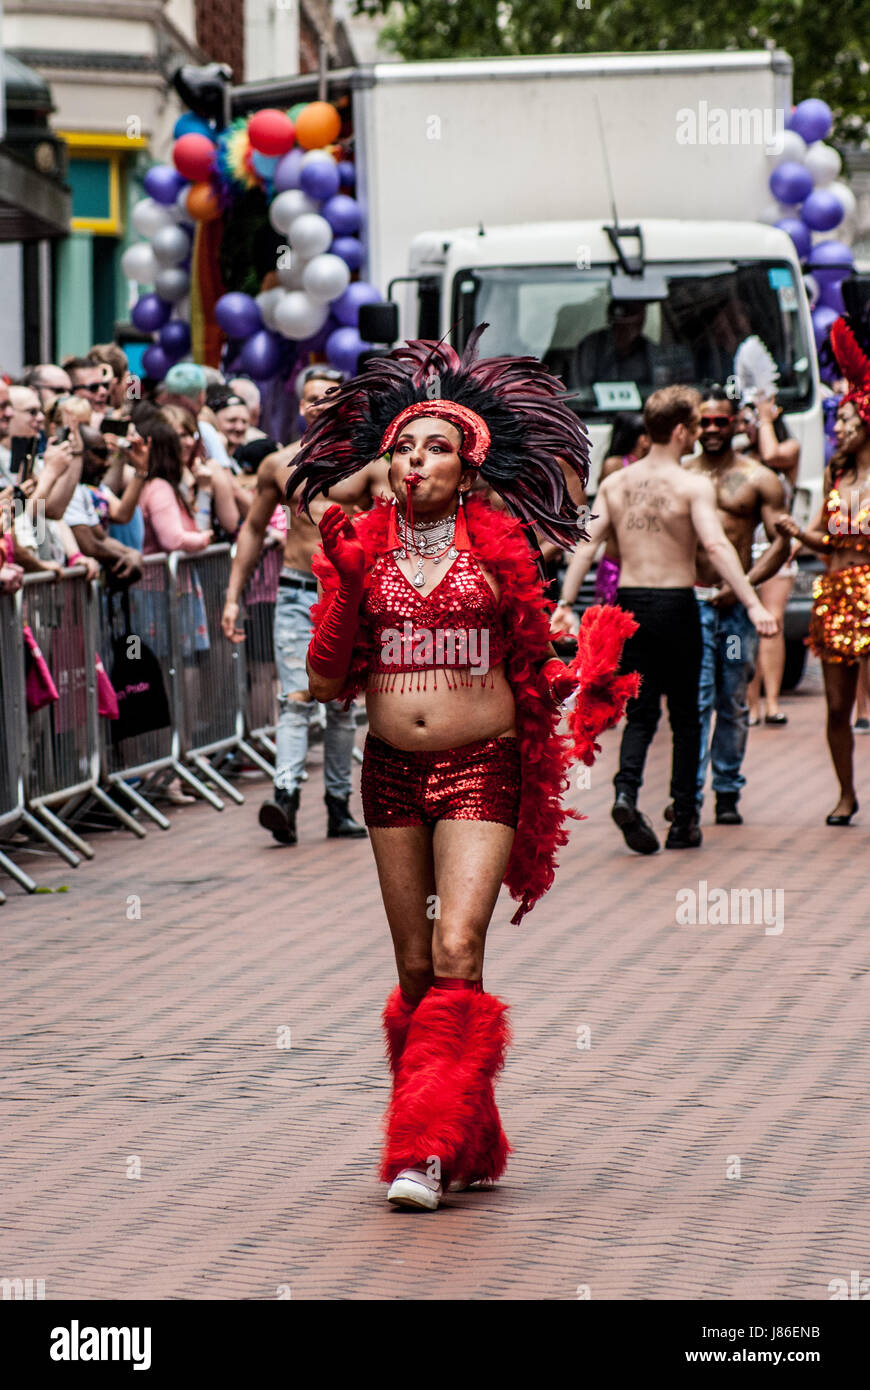 Birmingham, United Kingdom. 27th May 2017. Thousands of members of the LGBTQ community gathered today for the Birmingham Pride parade. The Birmingham Pride is an annual festival for the LGBTQ community usually taking place over the Spring Bank Holiday.  The event begins with a parade from Victoria Square in the city centre to the Gay Village in Hurst Street Credit: Jim Wood/Alamy Live News Stock Photo